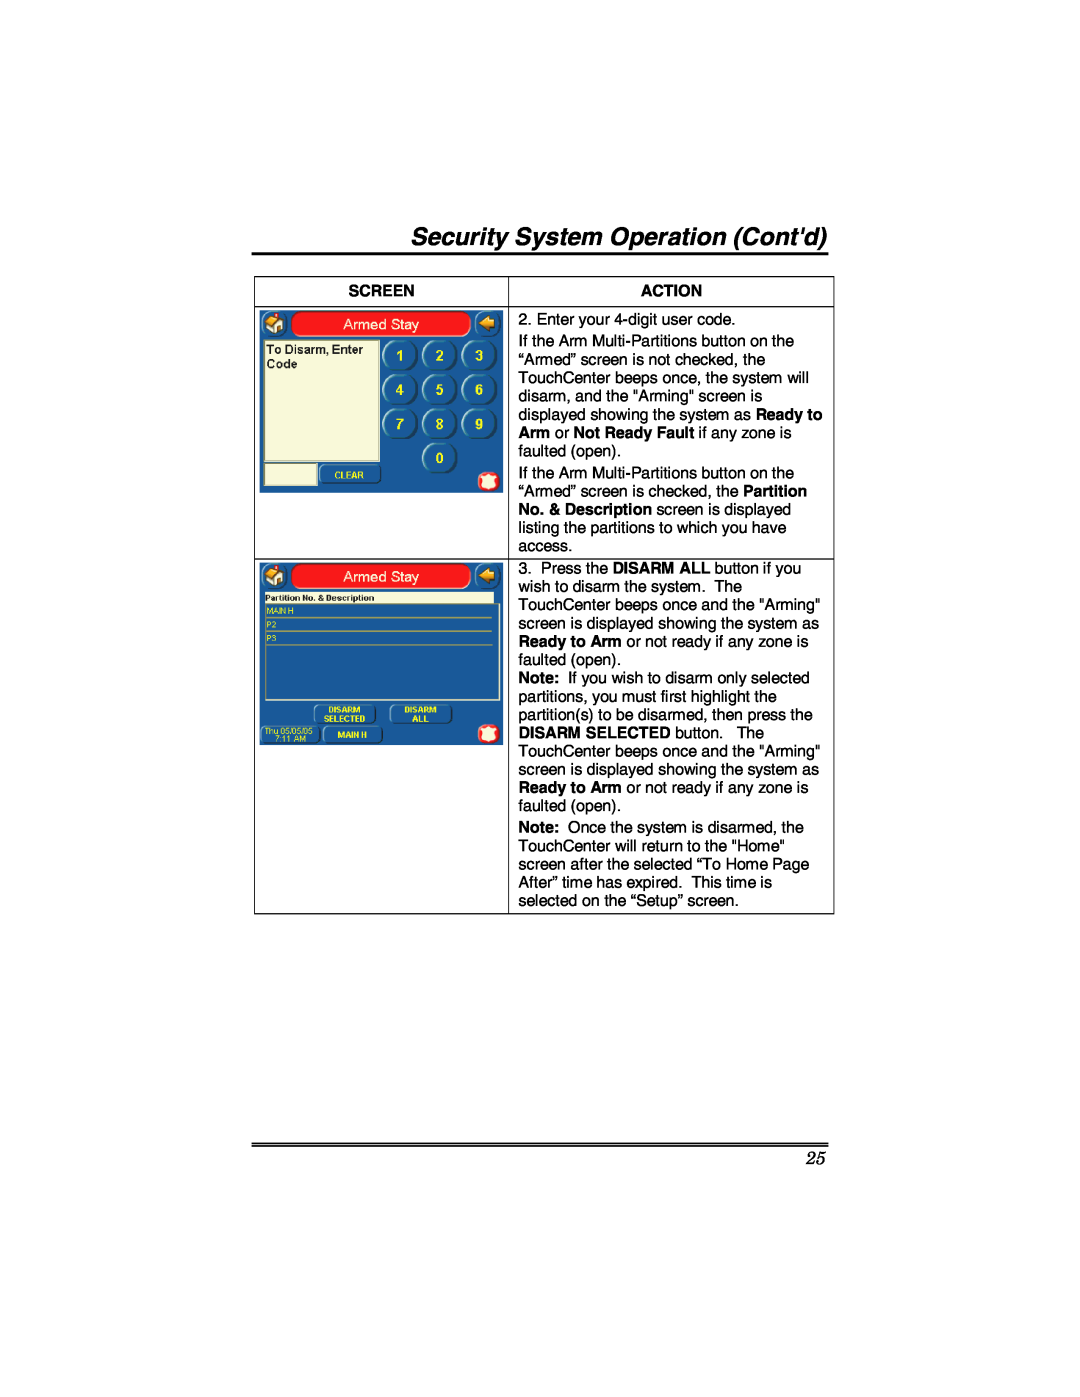 Honeywell 6271 manual Security System Operation Contd, Screen, Action, Arm or Not Ready Fault if any zone is 